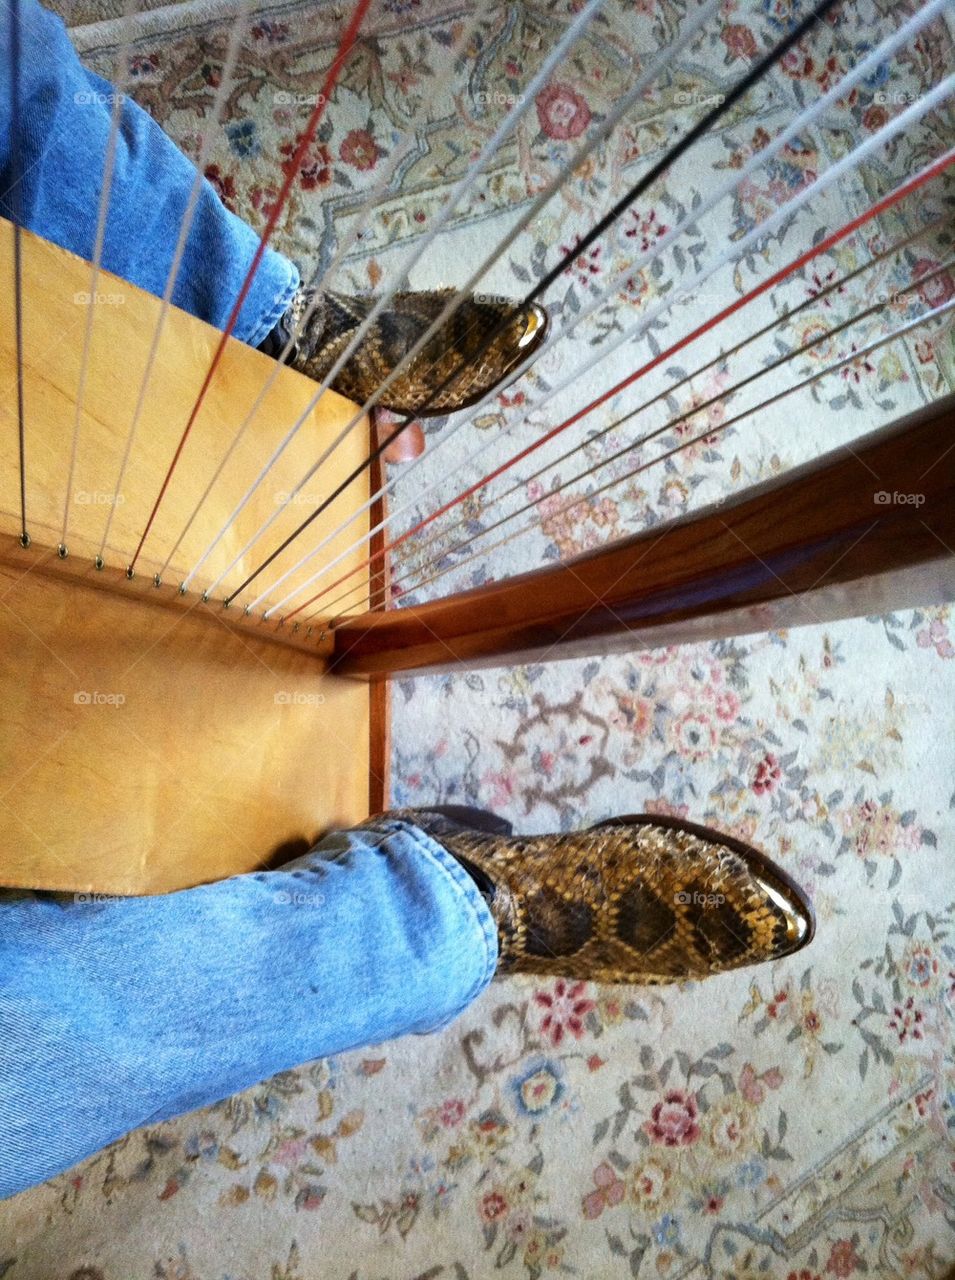 Playing Harp with snakeskin boots